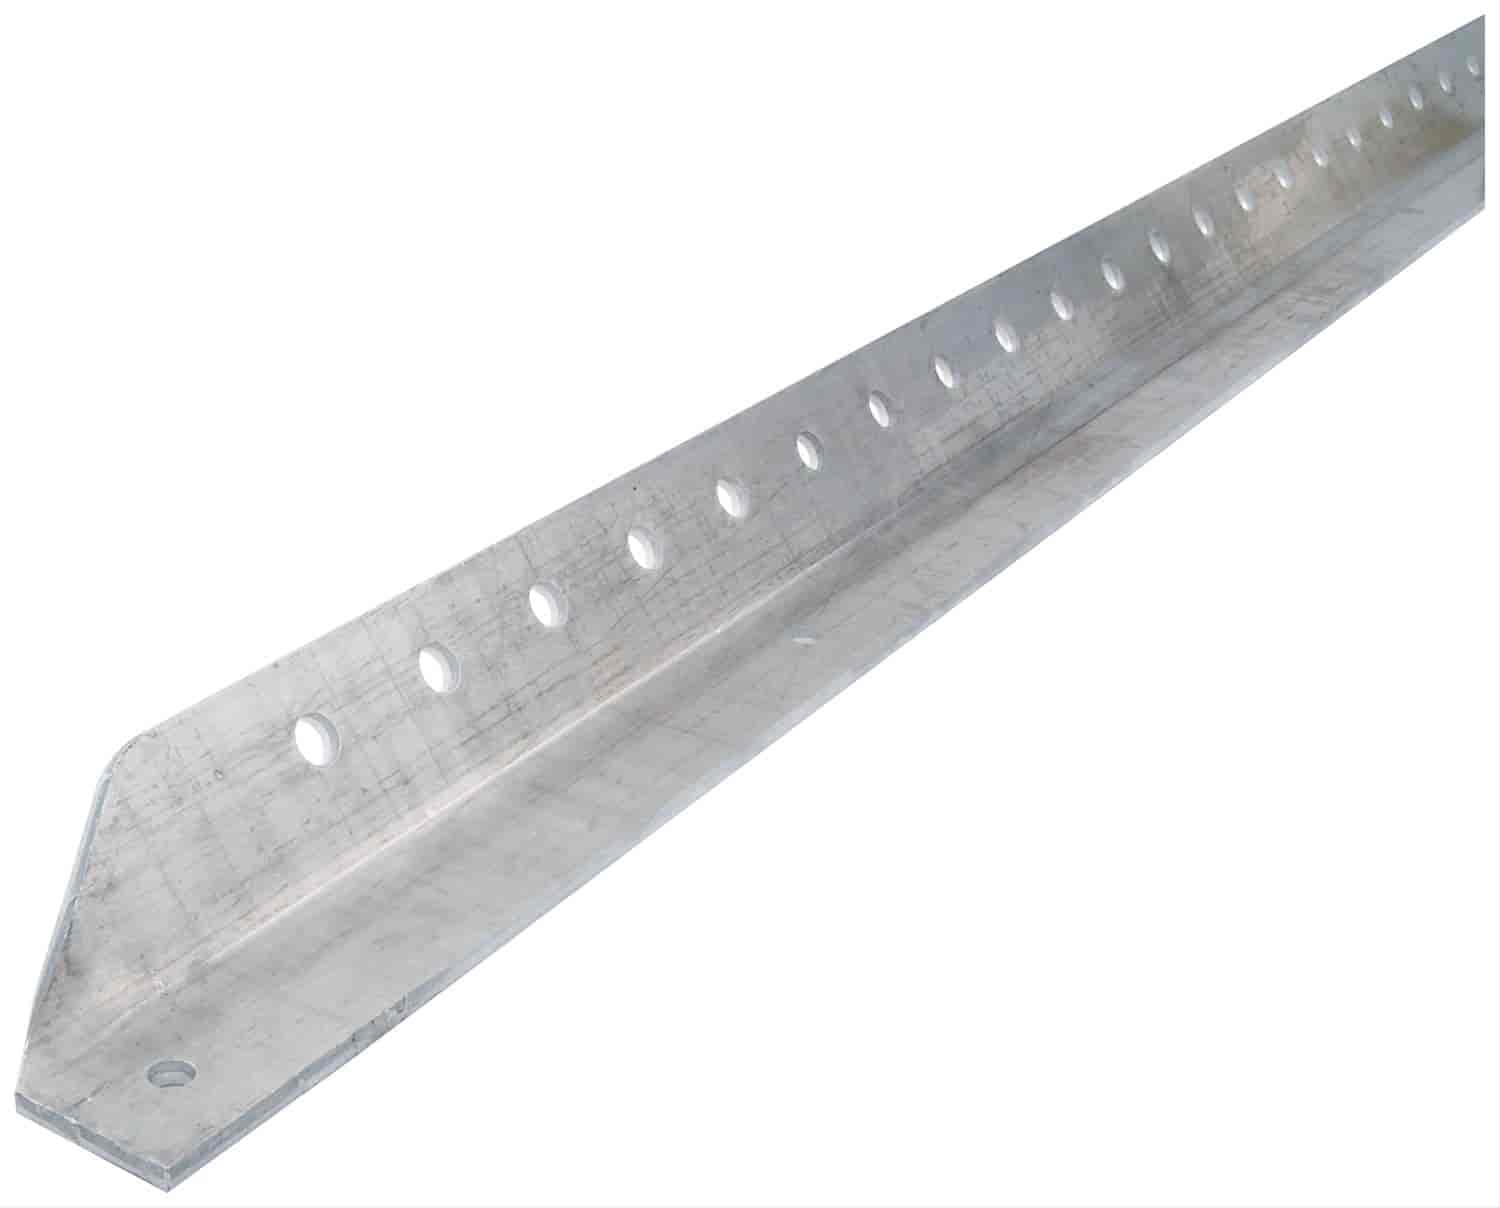 Slotted Angle Aluminum 26" Long x 1" Wide x 1/8" Thick